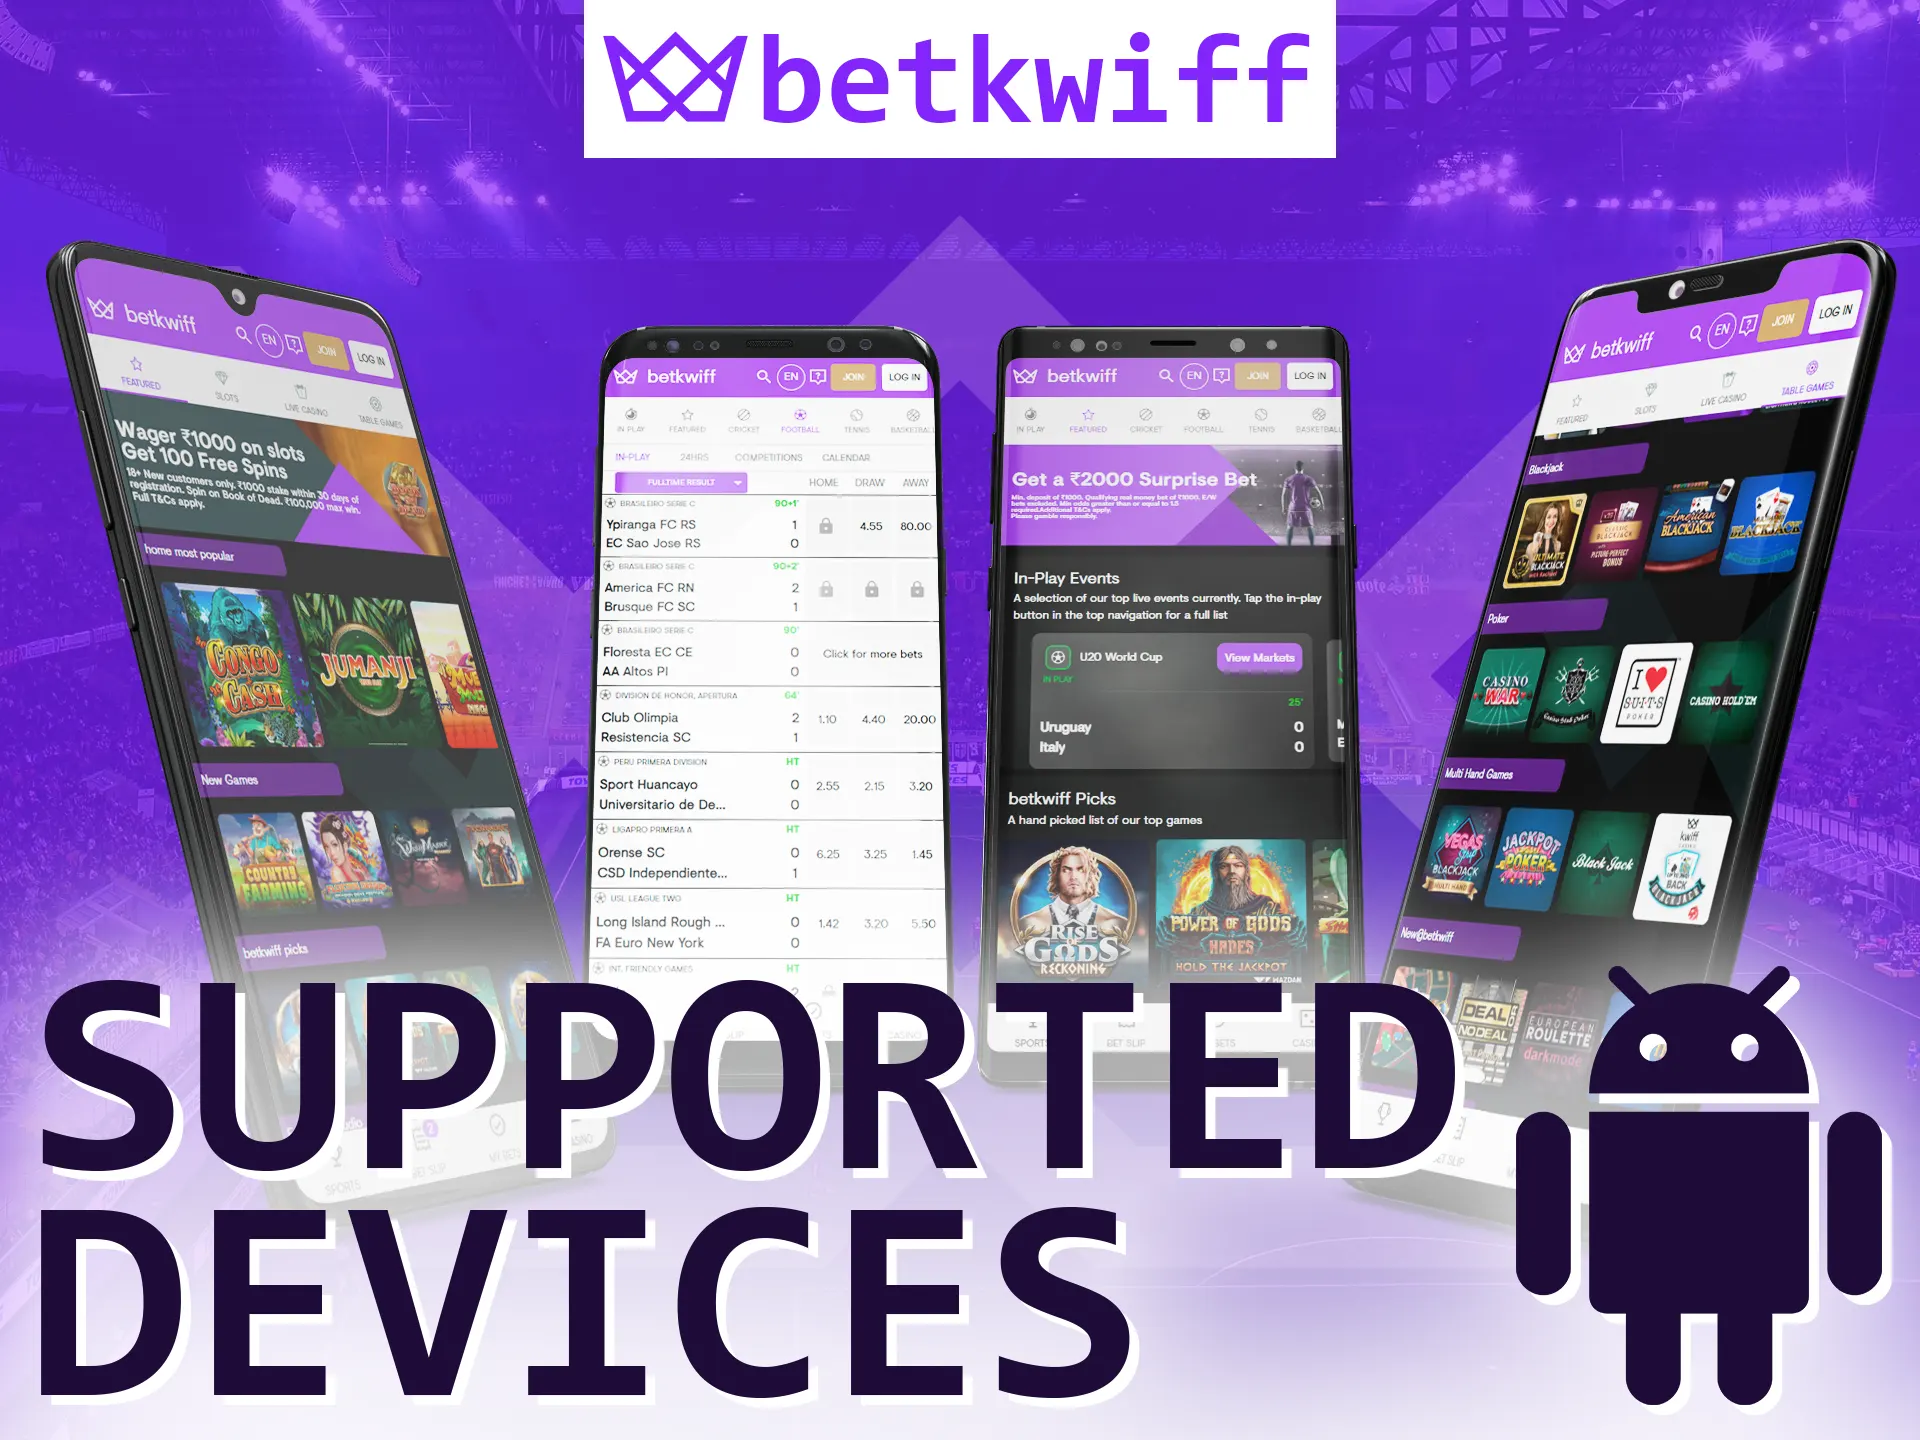 The Betkwiff app is supported on a variety of devices with the Android system.